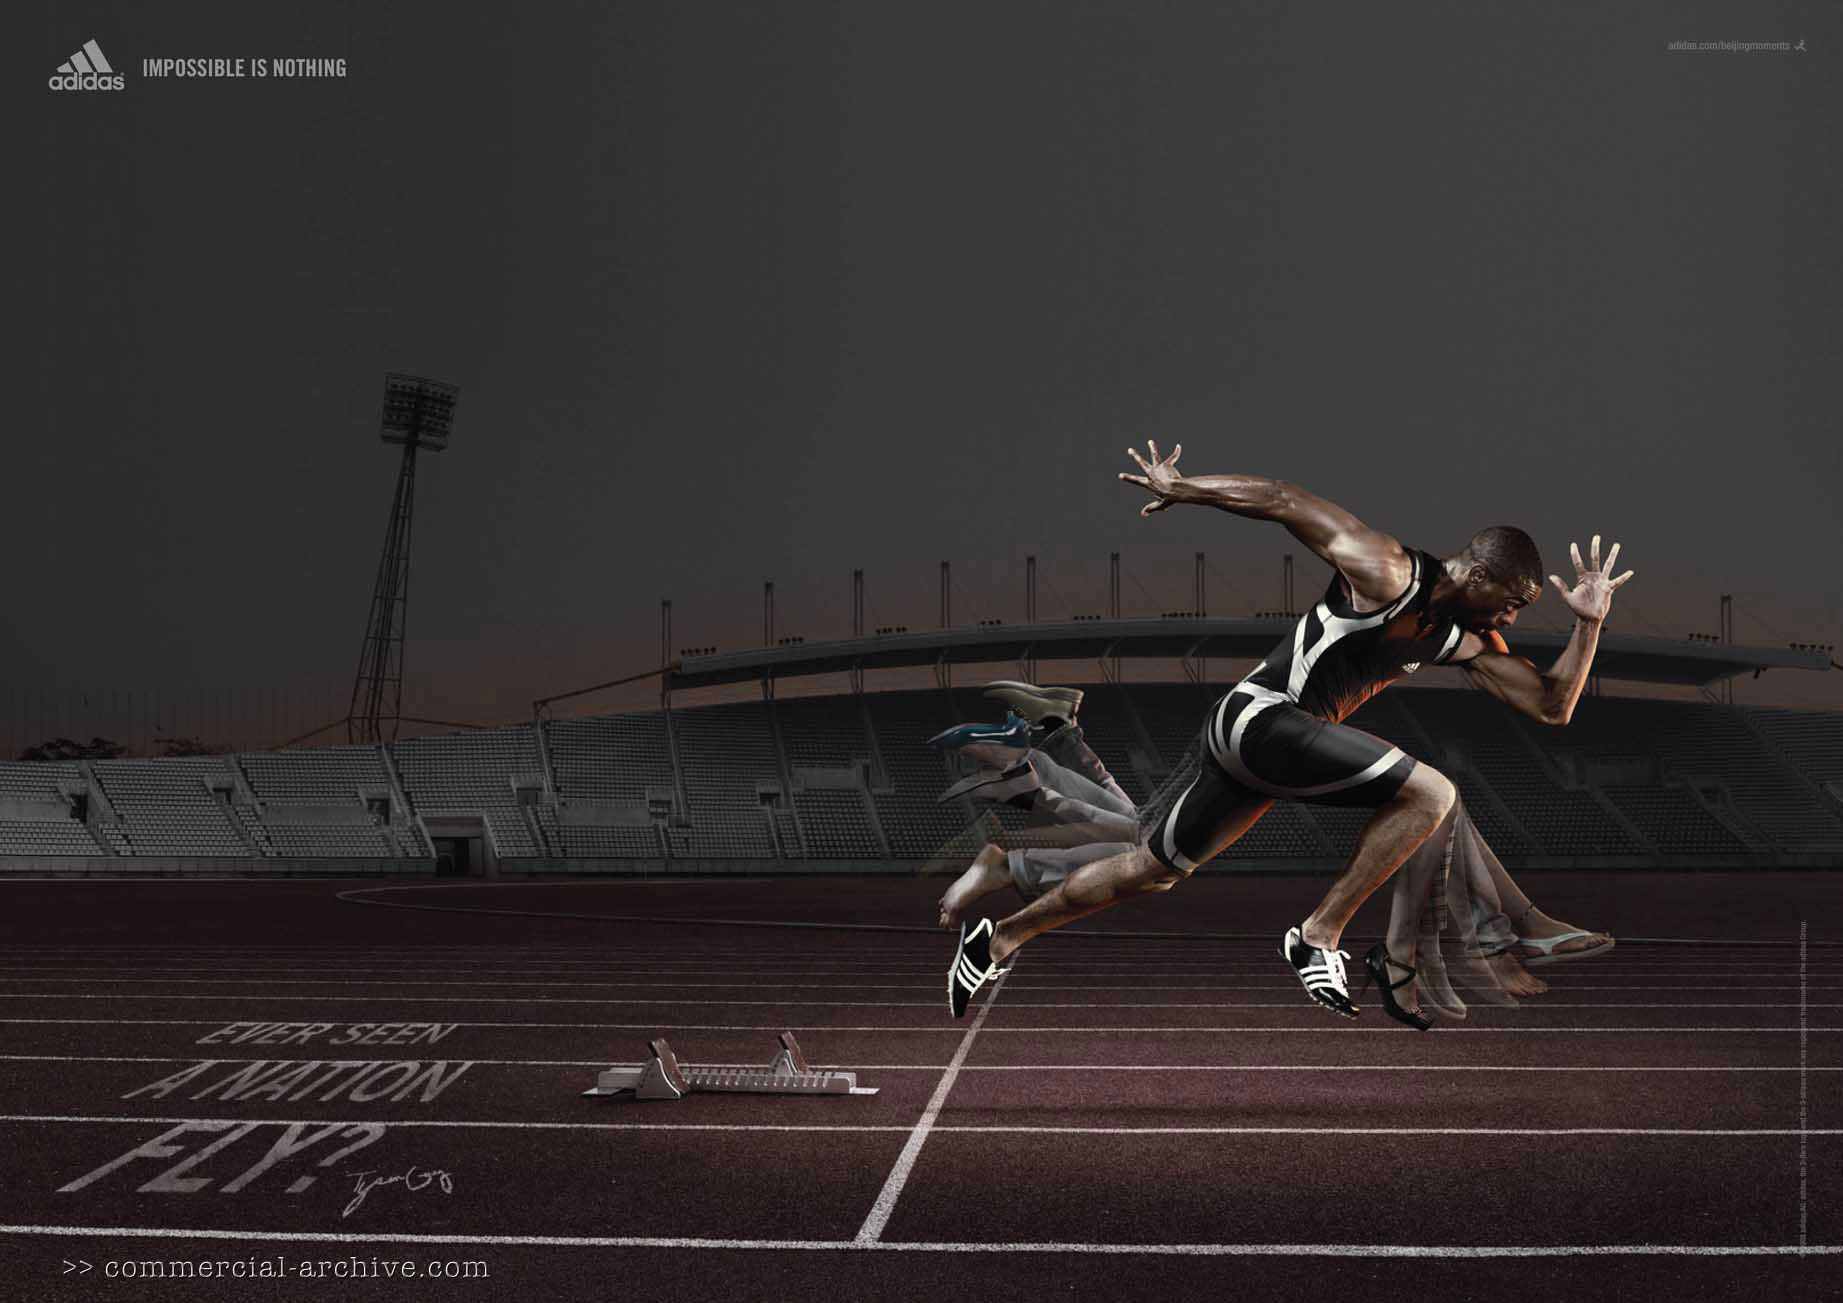 Tyson Gay was dropped by sponsors Adidas after being given a two-year drugs ban but is now expected to wear Nike clothing this season ©Adidas